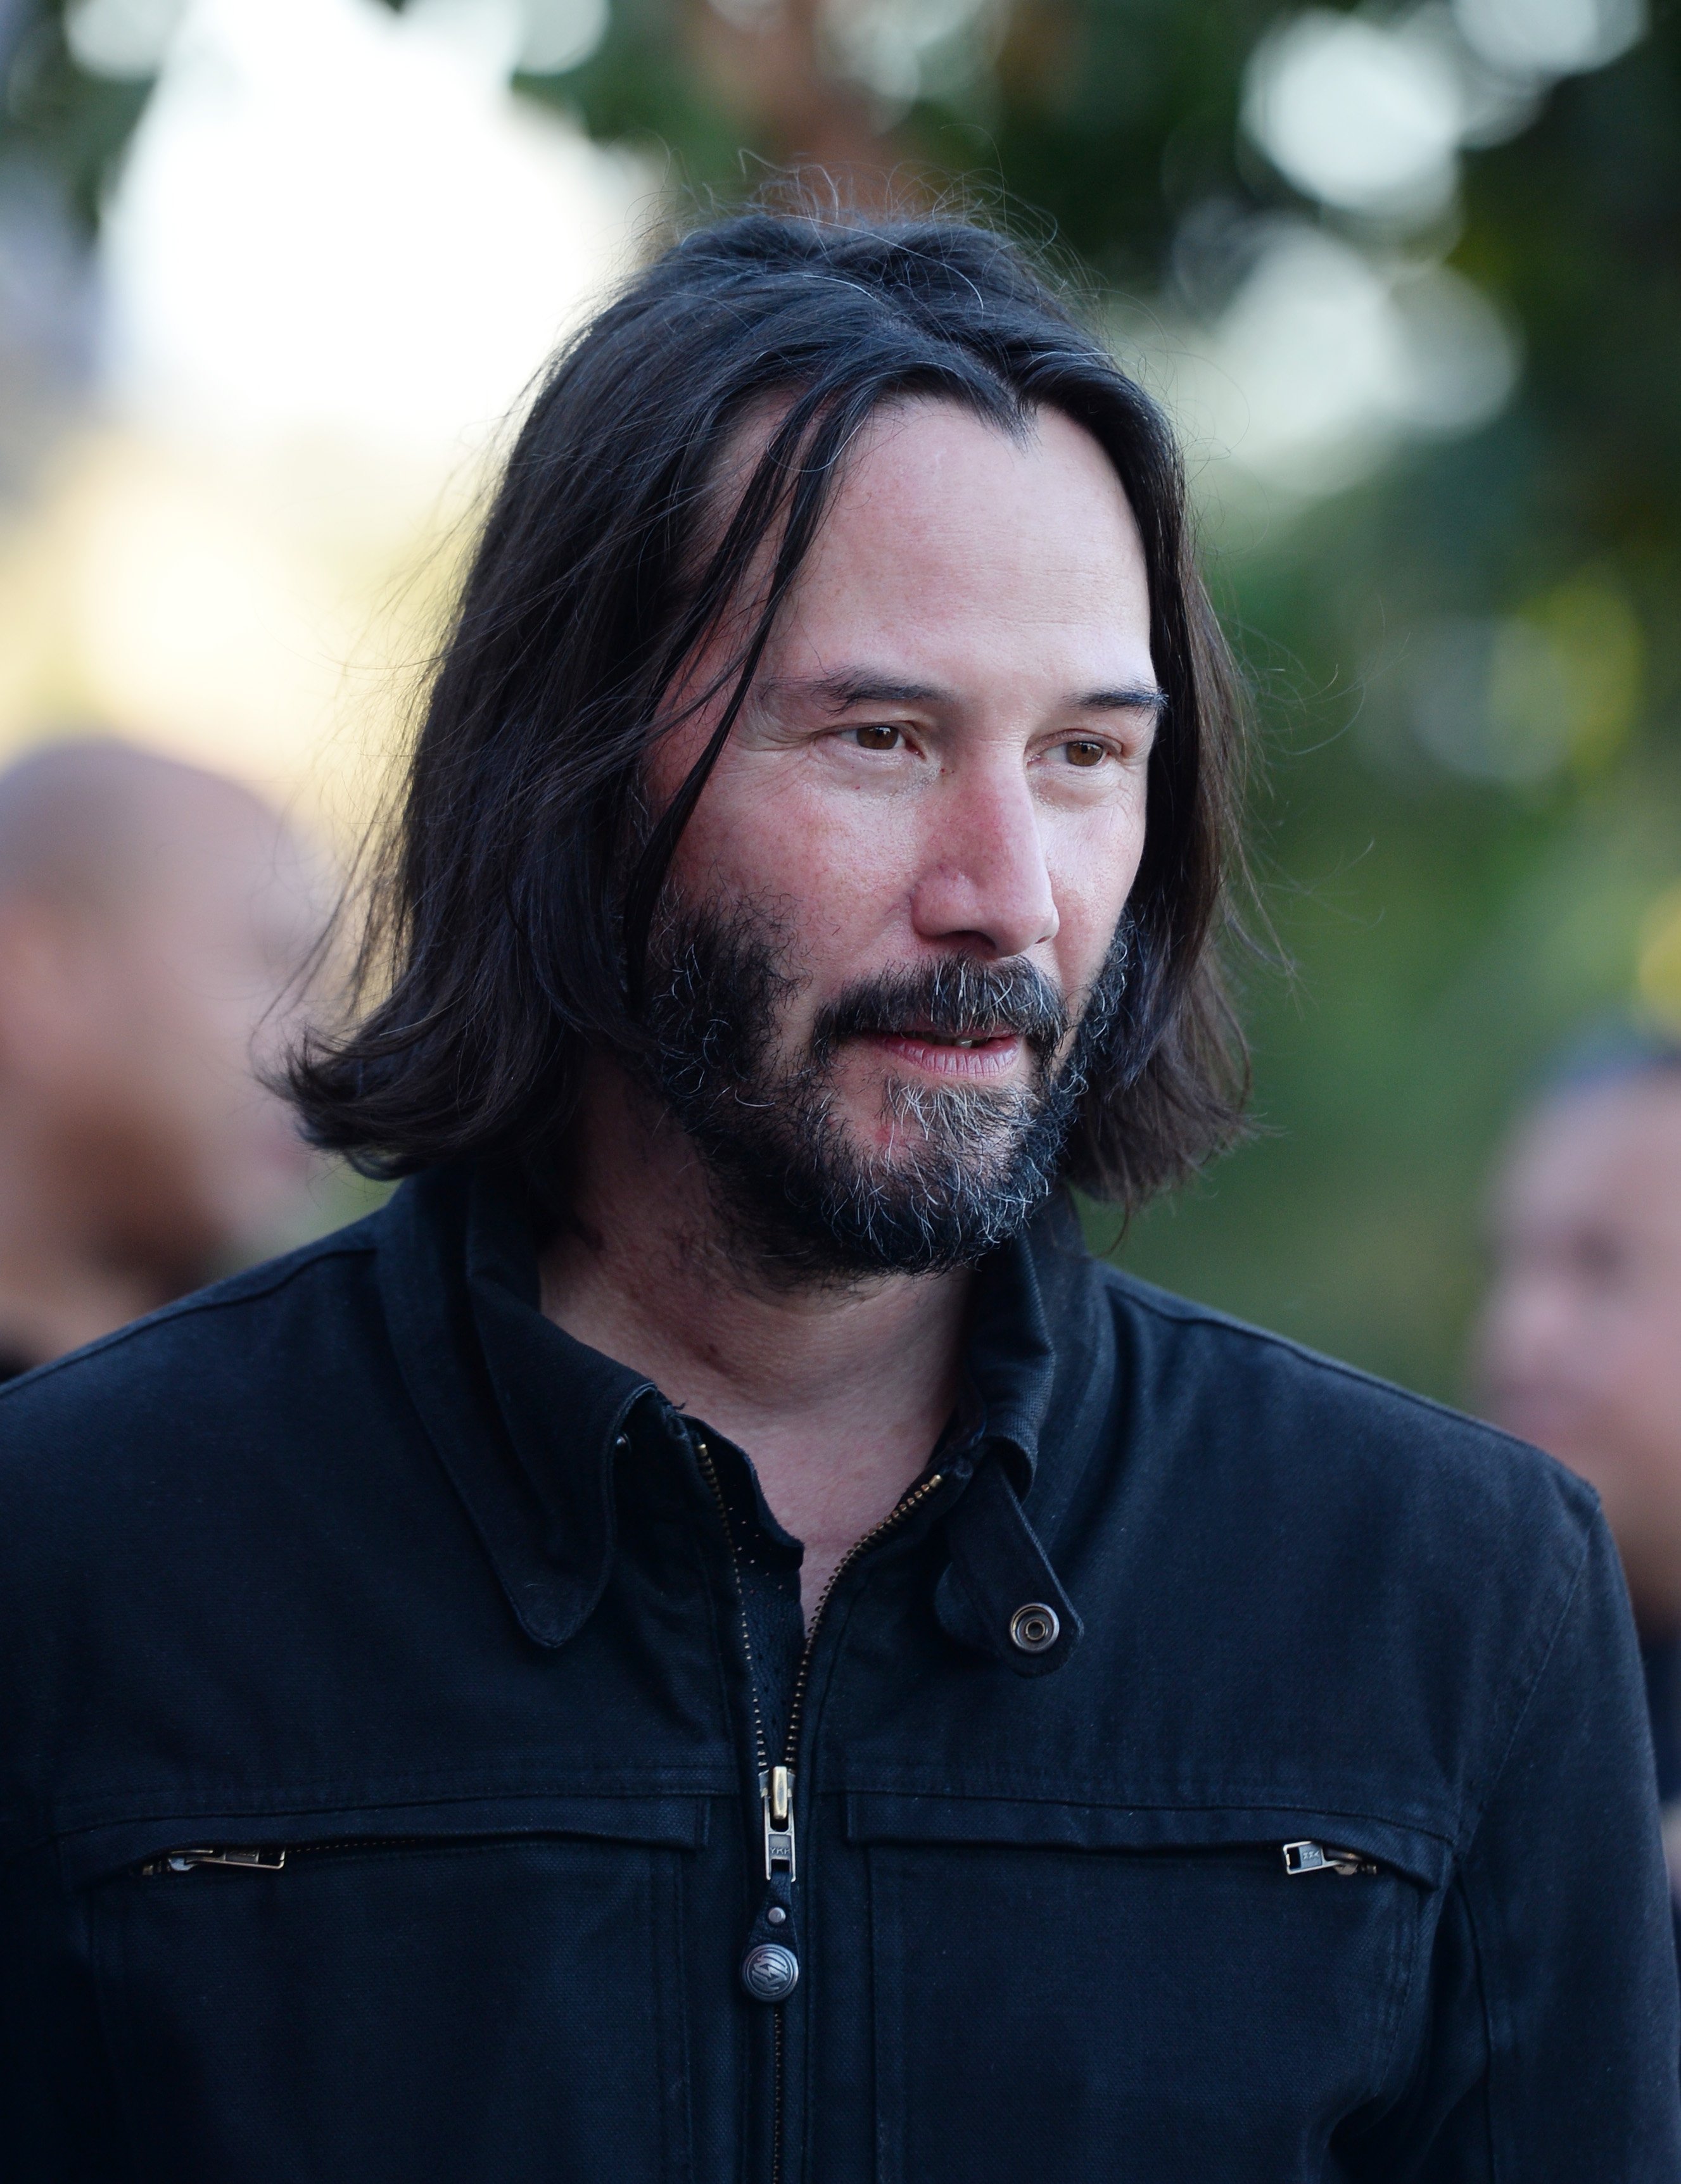 Keanu Reeves arrives at Amazon's LA special screening "Too old to die young" at the Vista Theater on June 10, 2019 in Los Angeles, California.  |  Source: Getty Images